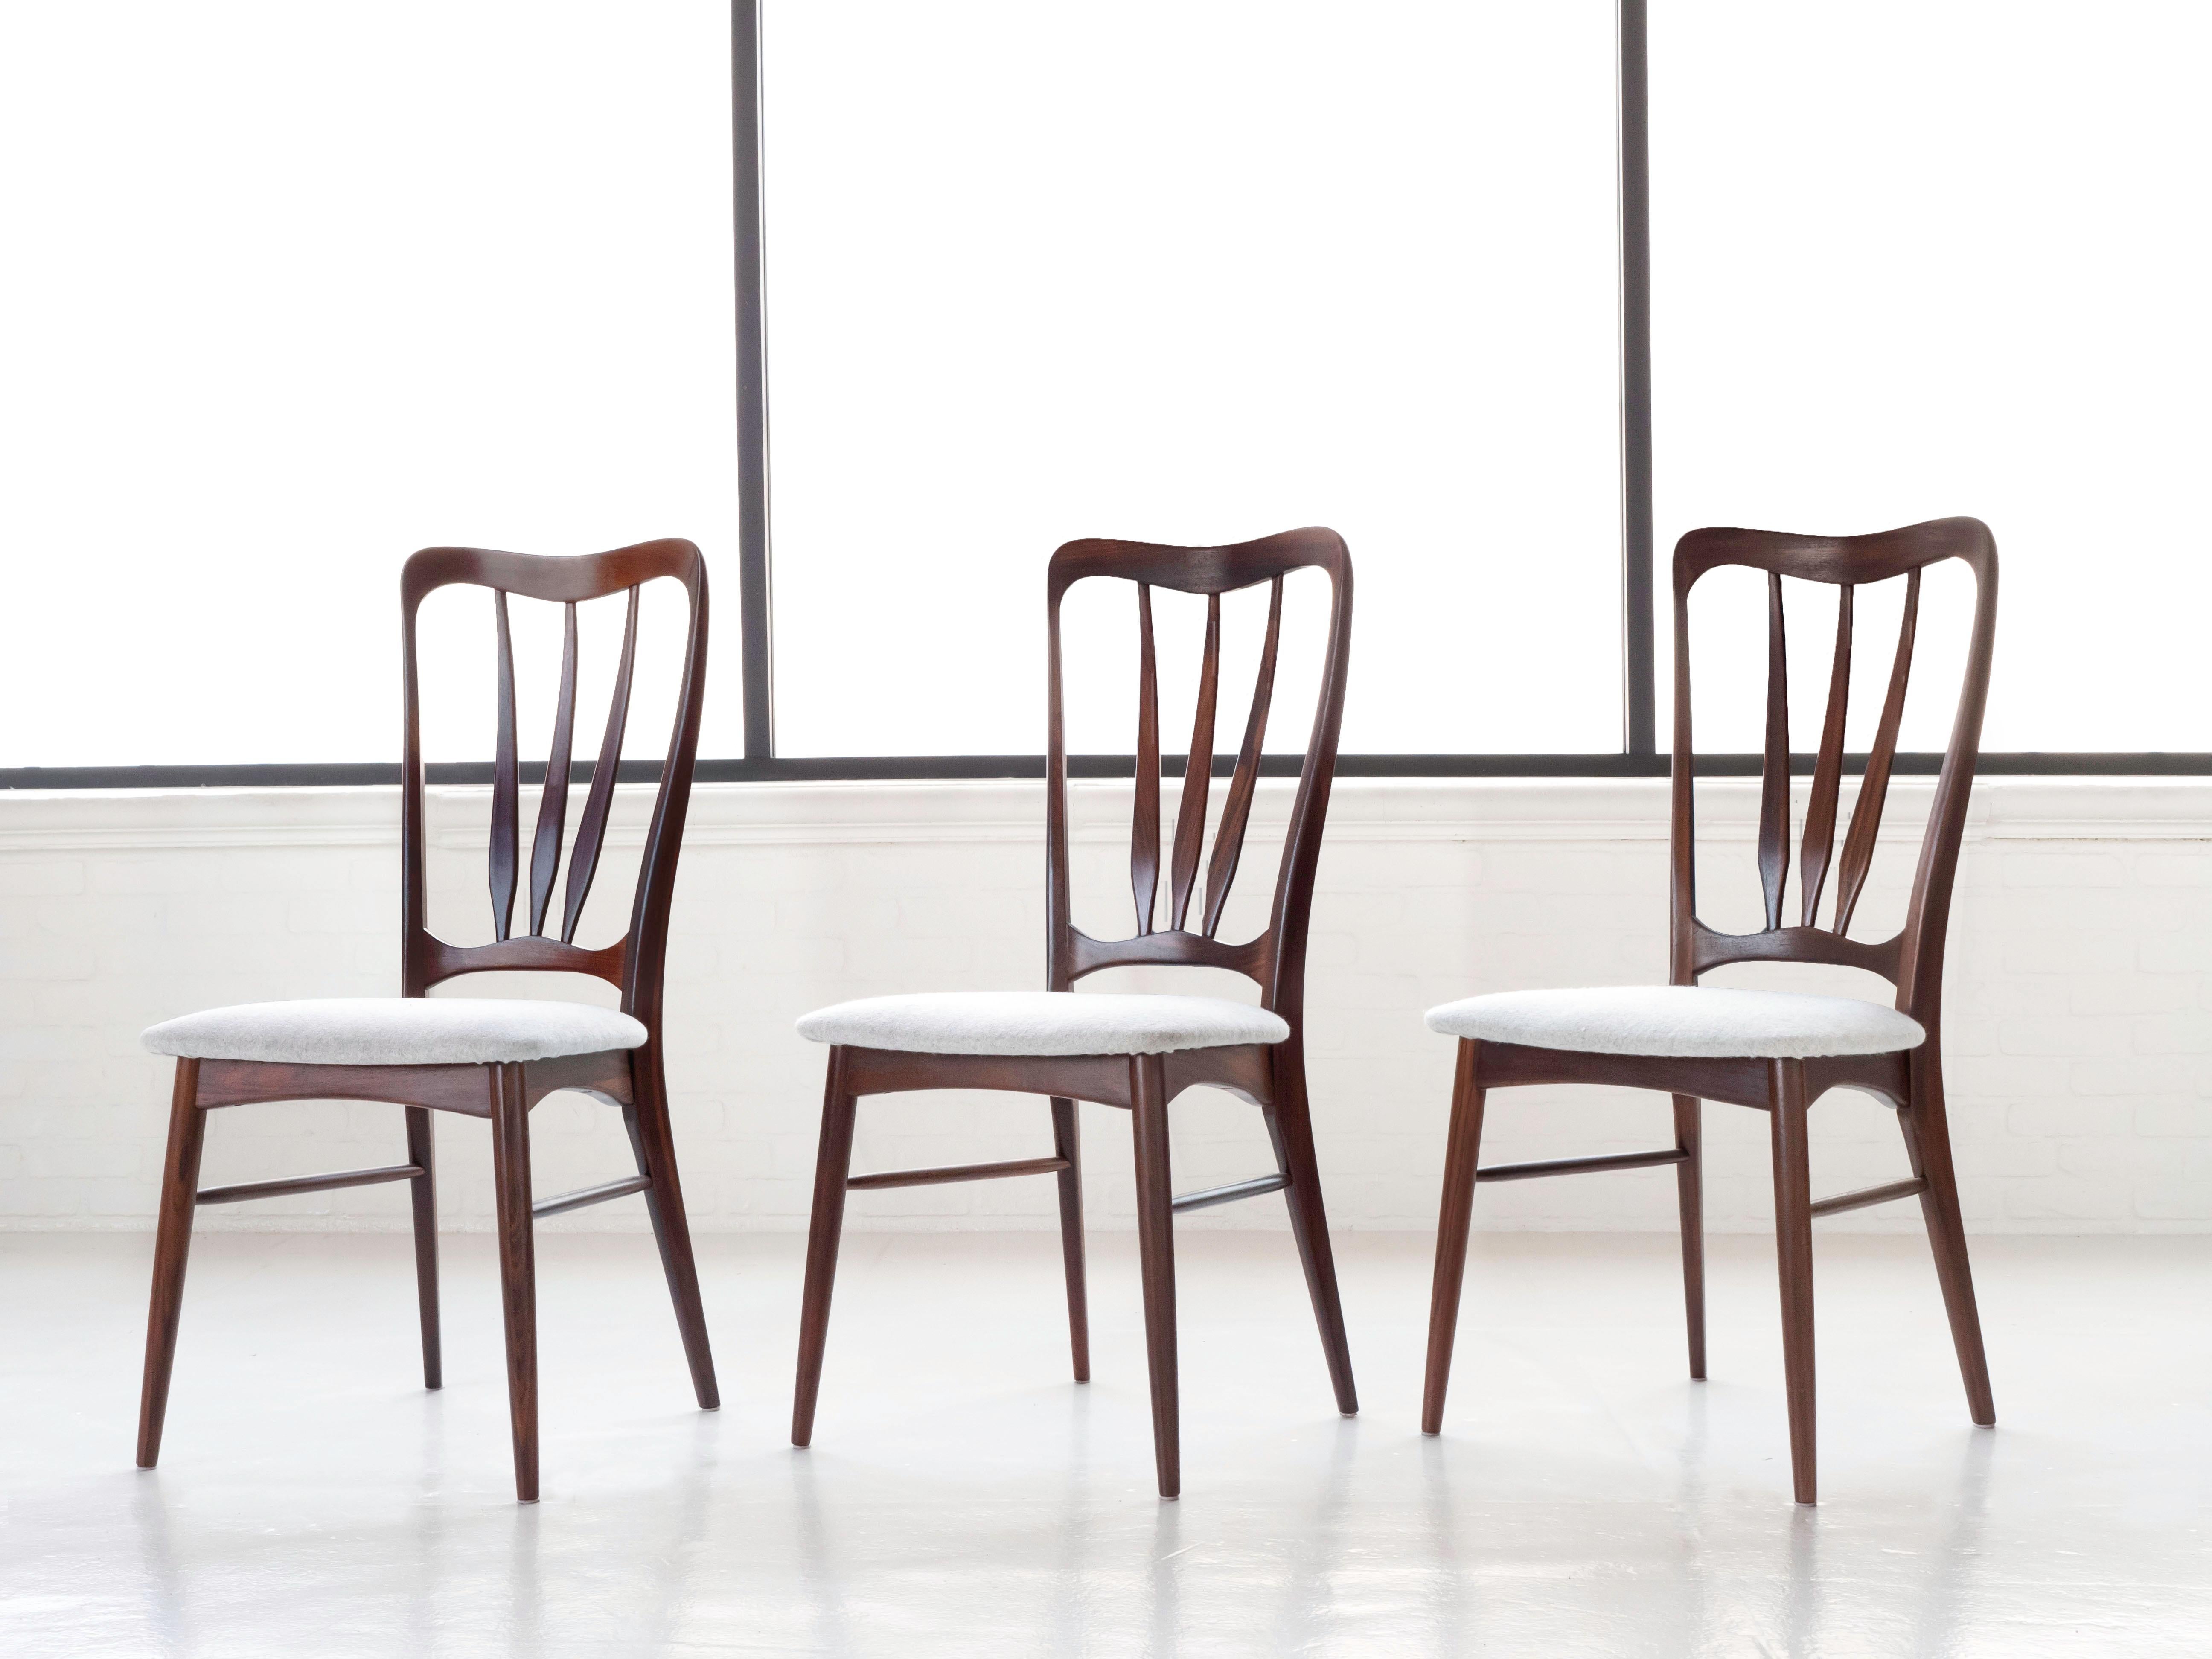 Set of 6 rosewood dining chairs by designer Niels Koefoed for his company Koefoed Hornslet. Made in Denmark circa 1960's. Each chair has been refinished and has new upholstery. All chairs are stamped underneath with the makers mark. Style name